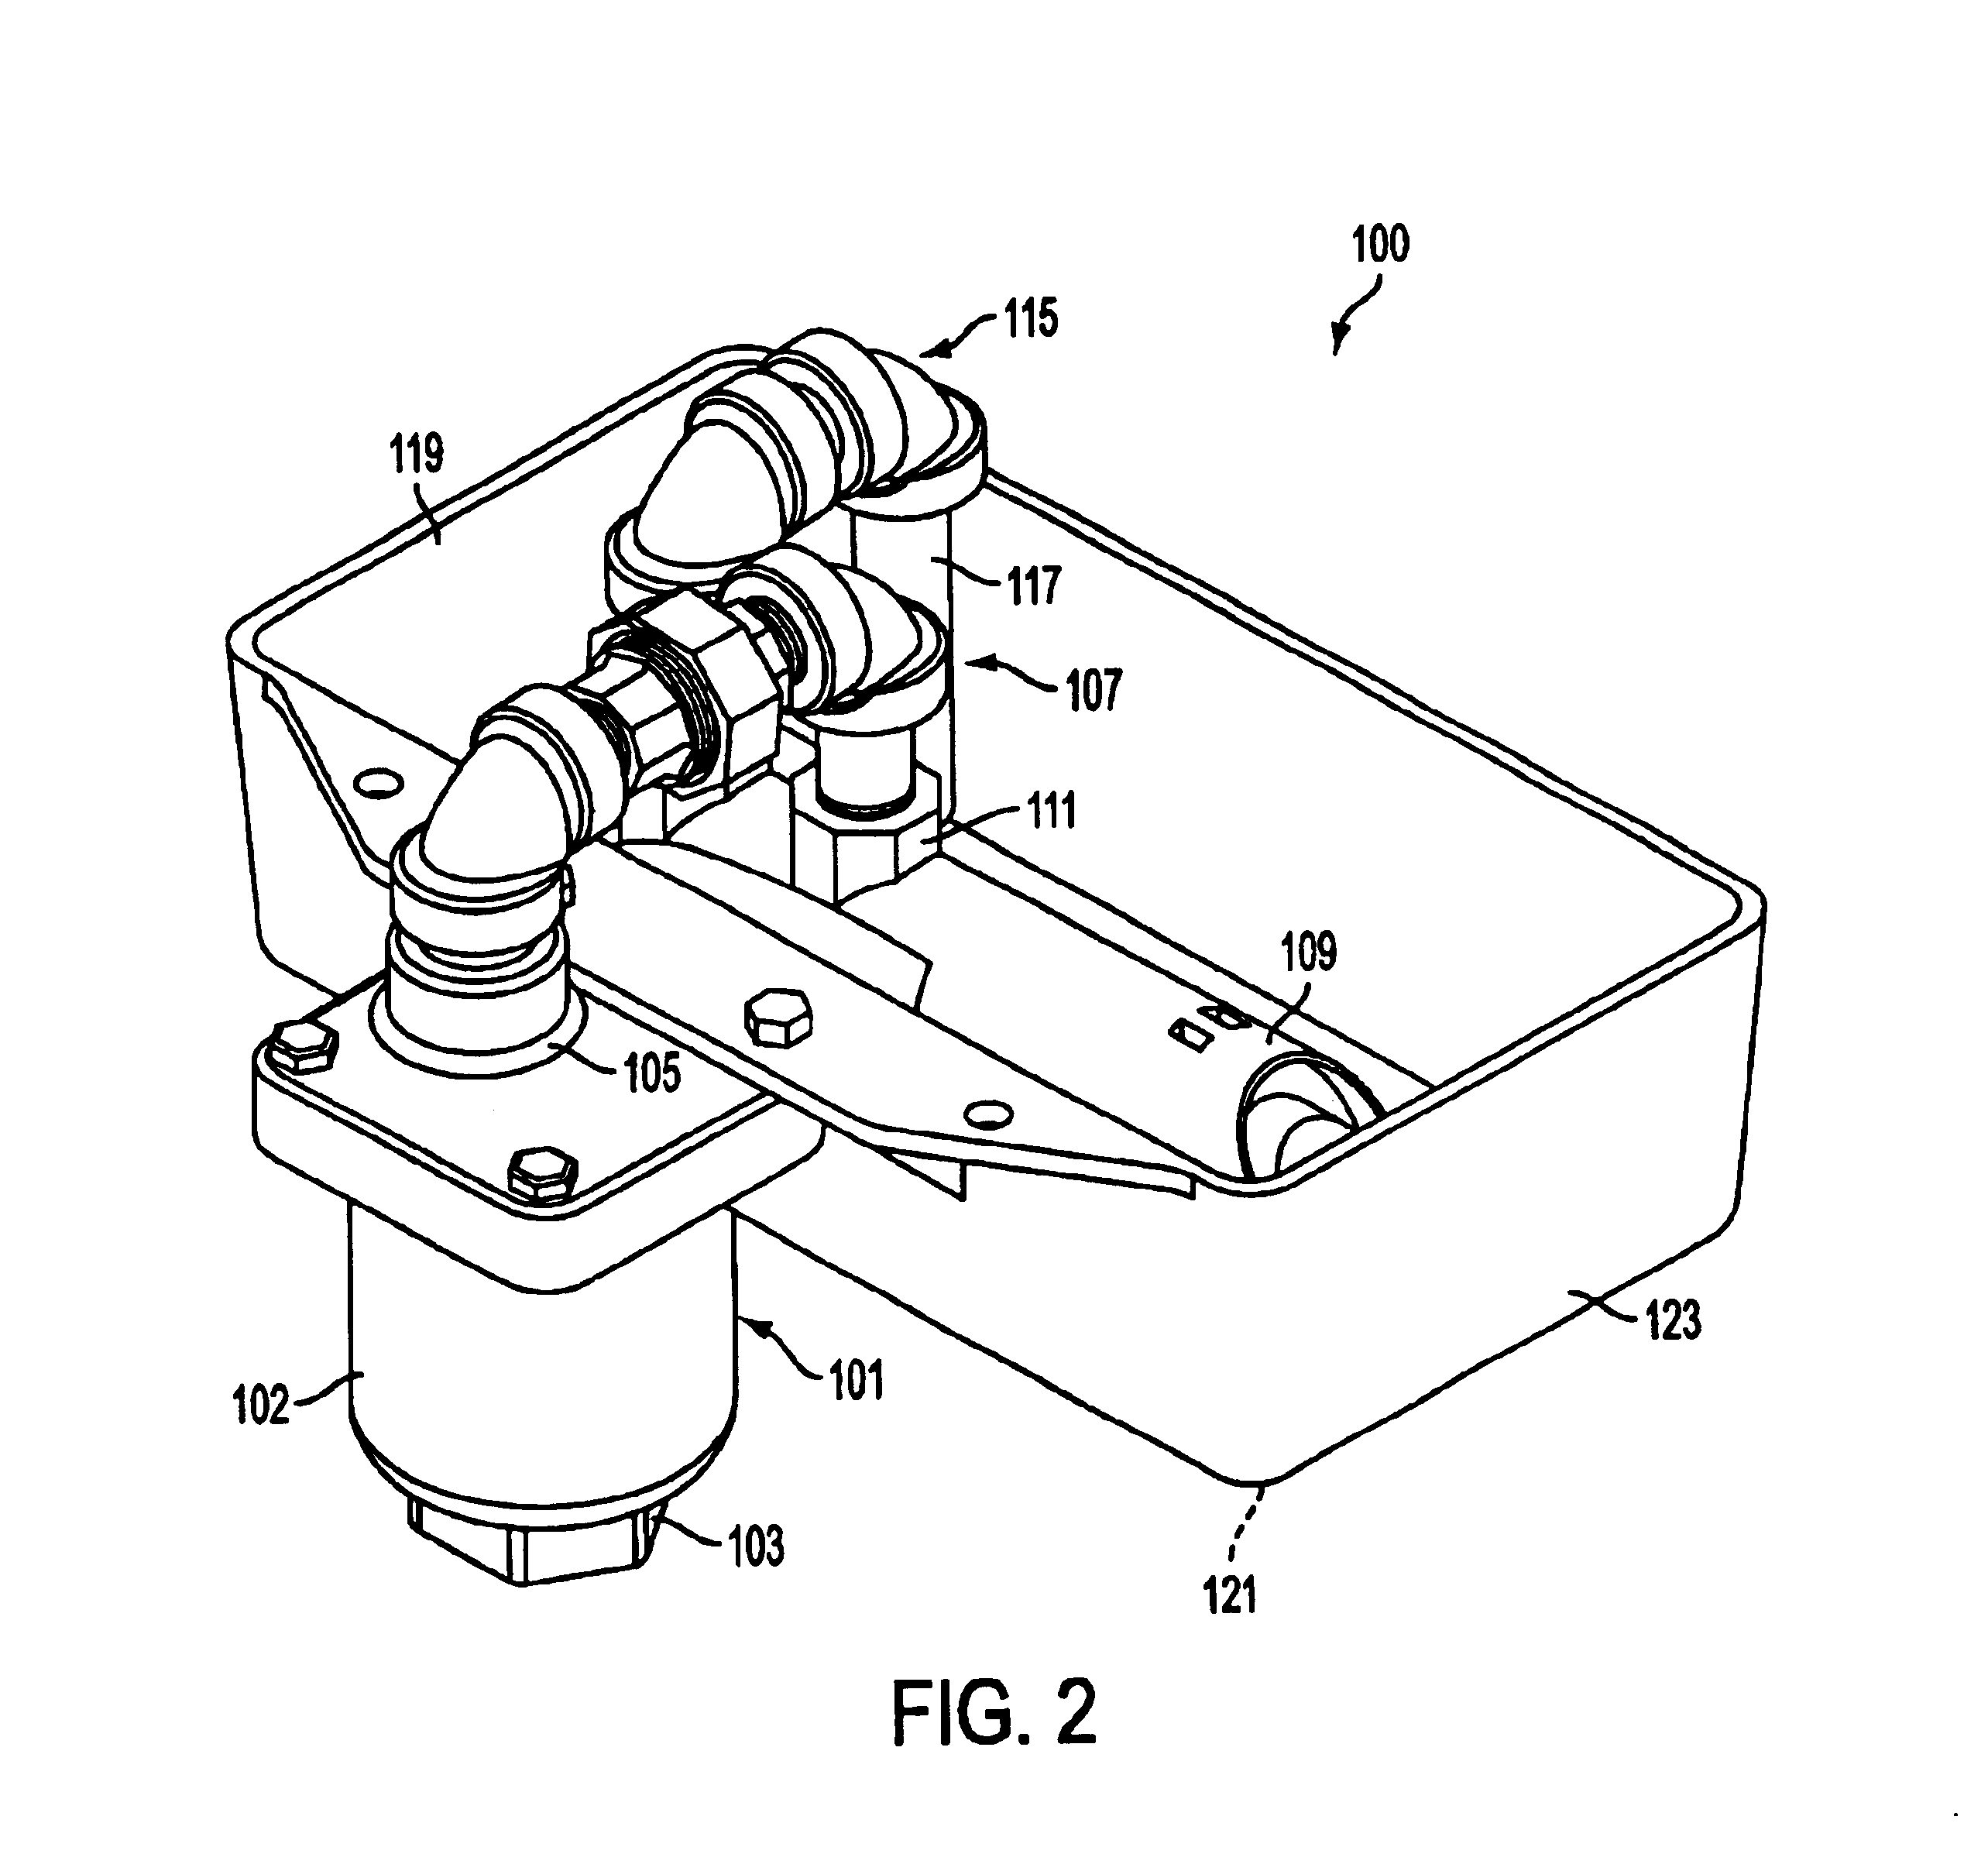 Automatic air release system with shutoff valve